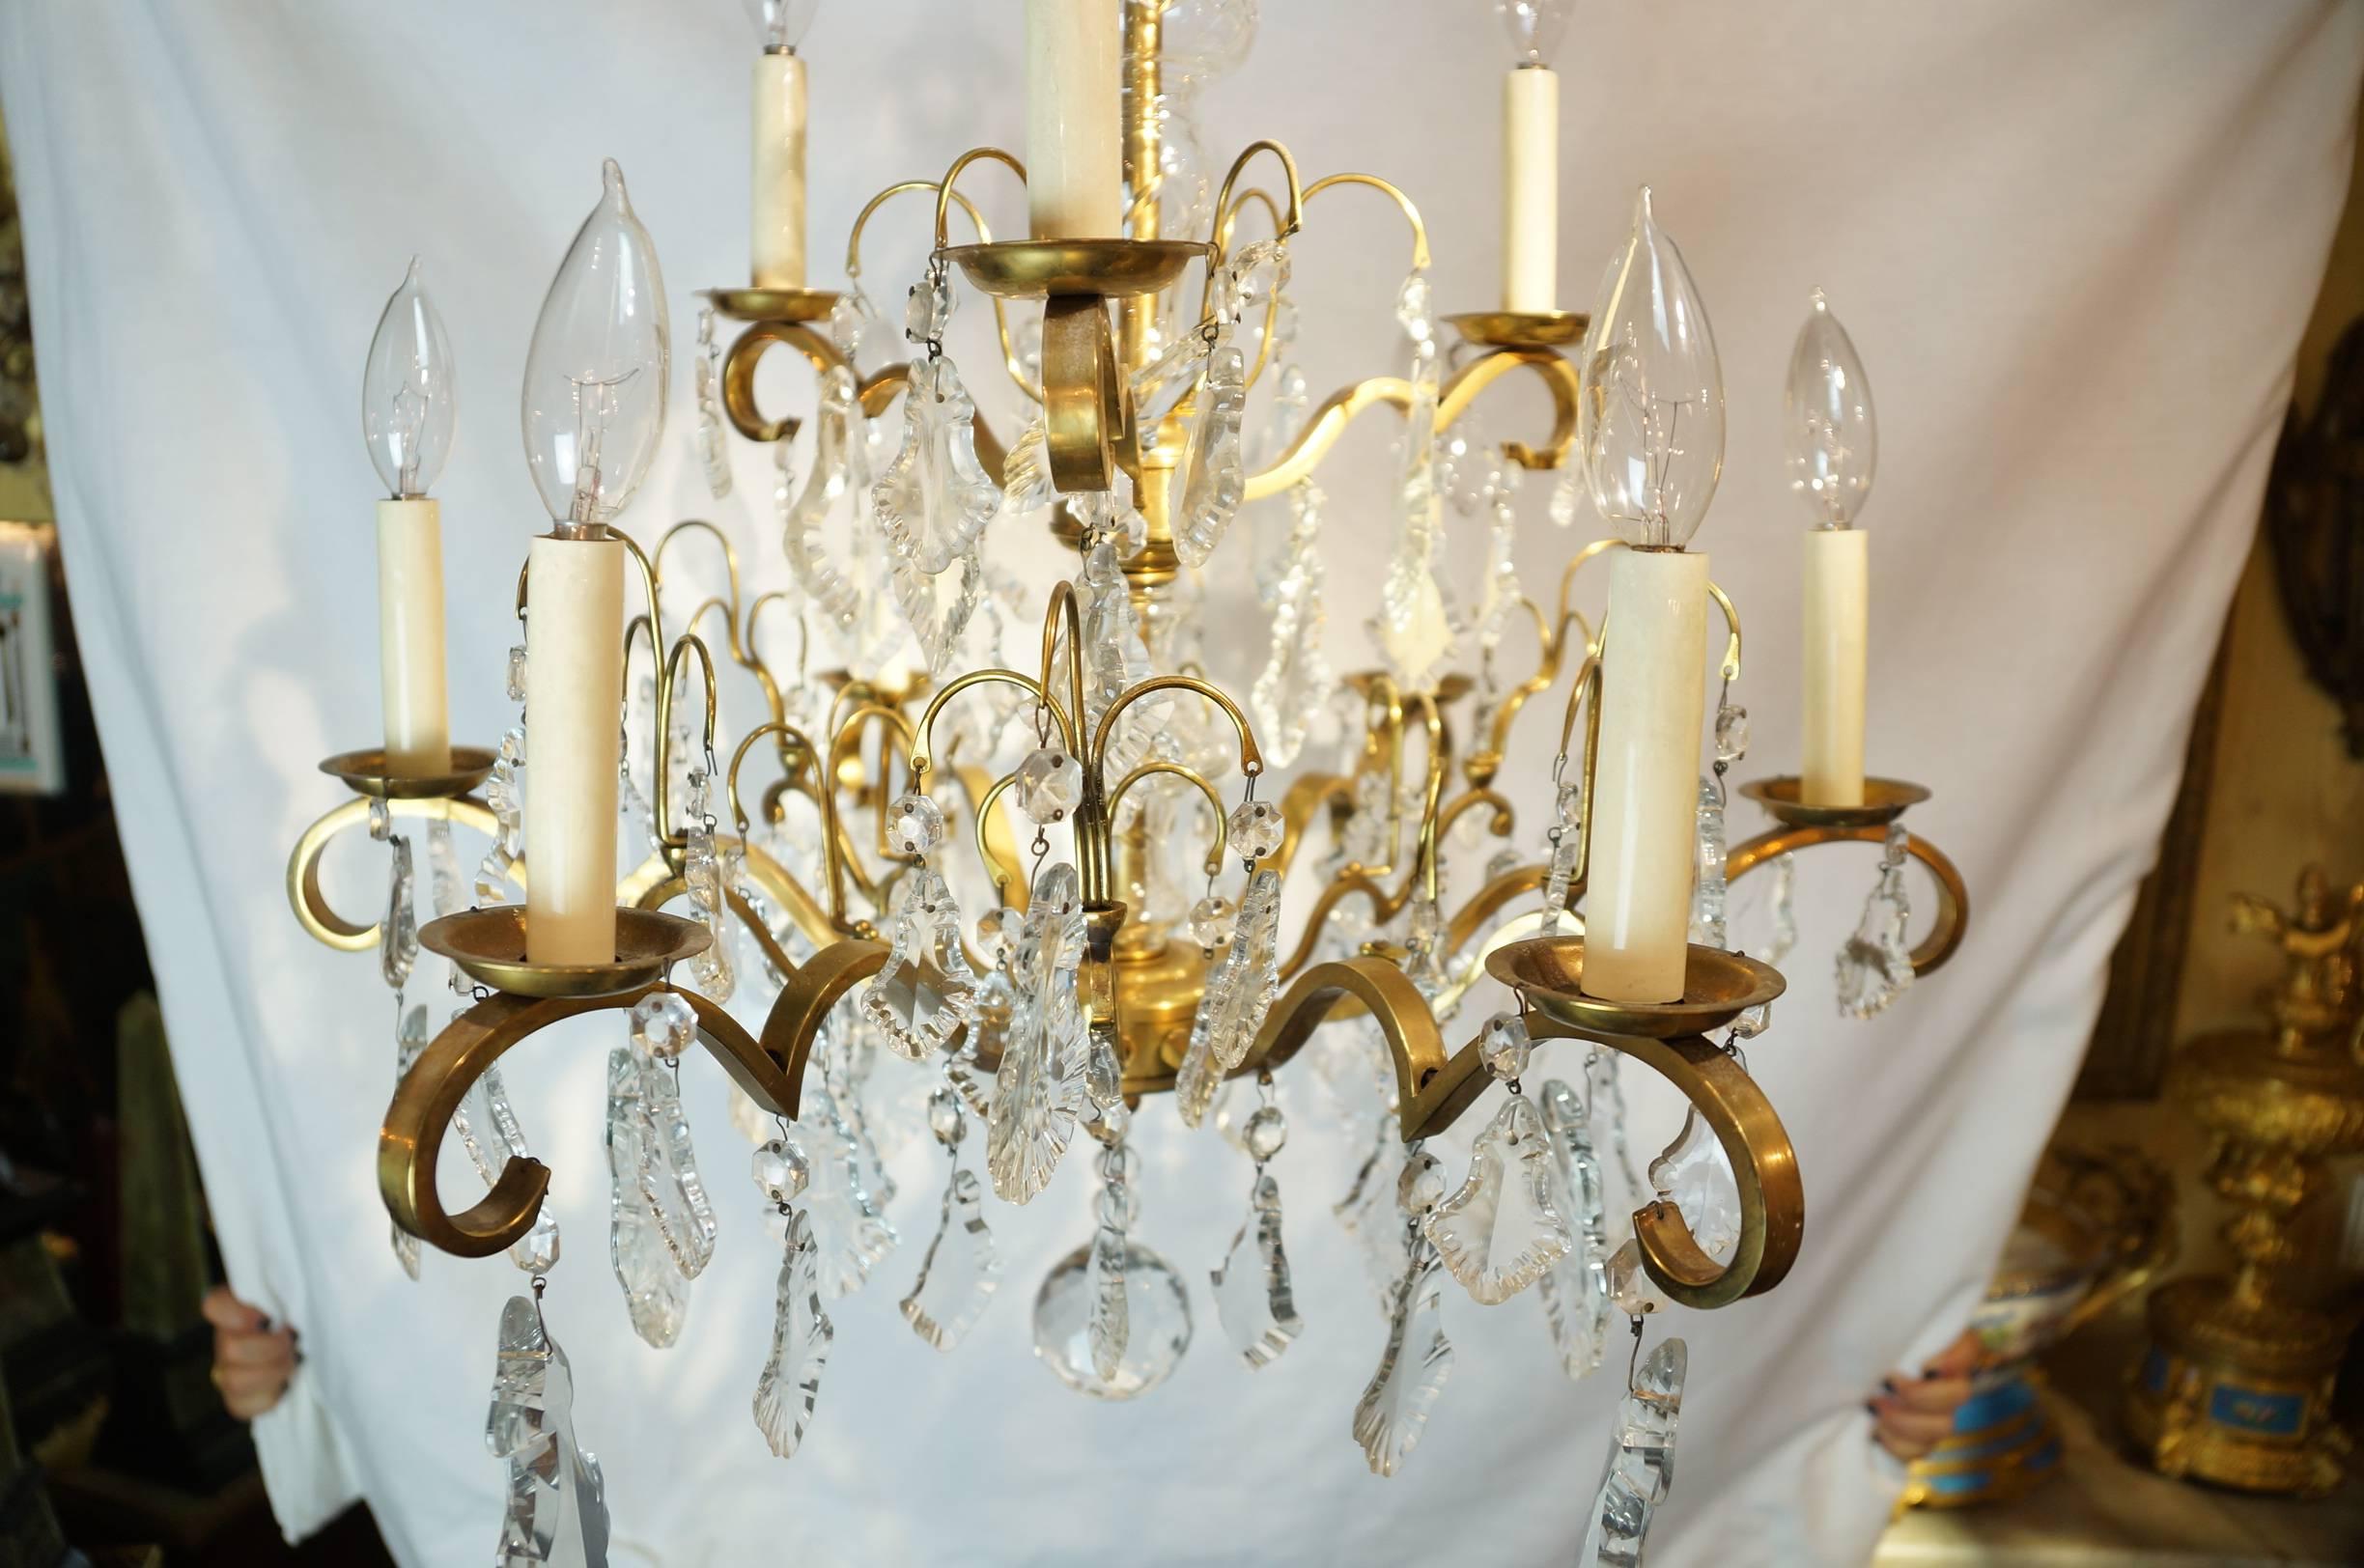 Nine Arm Crystal and Gilt Brass Louis XV Style Chandeliers
PLEASE NOTE THAT THIS IS ONLY ONE CHANDELIER
May Need to Be Wired 
Stock Number: L374